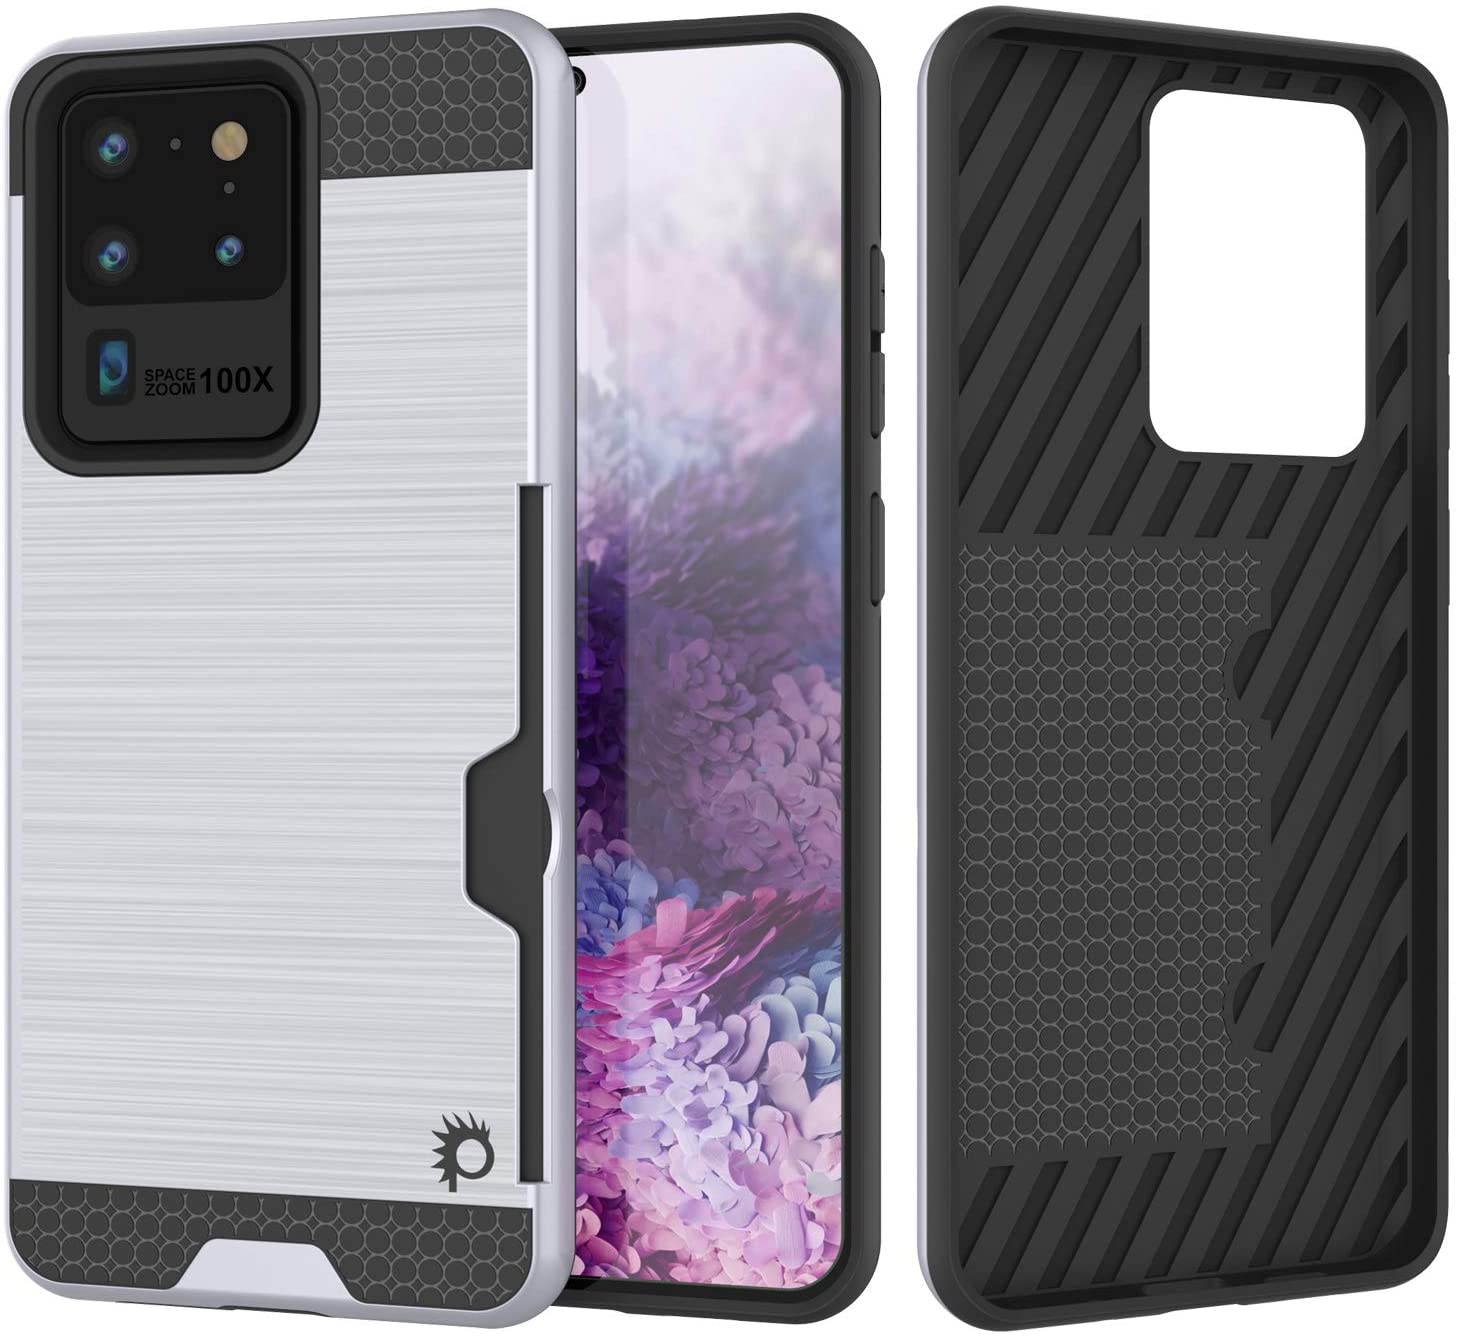 Galaxy S20 Ultra Case, PUNKcase [SLOT Series] [Slim Fit] Dual-Layer Armor Cover w/Integrated Anti-Shock System, Credit Card Slot [White]